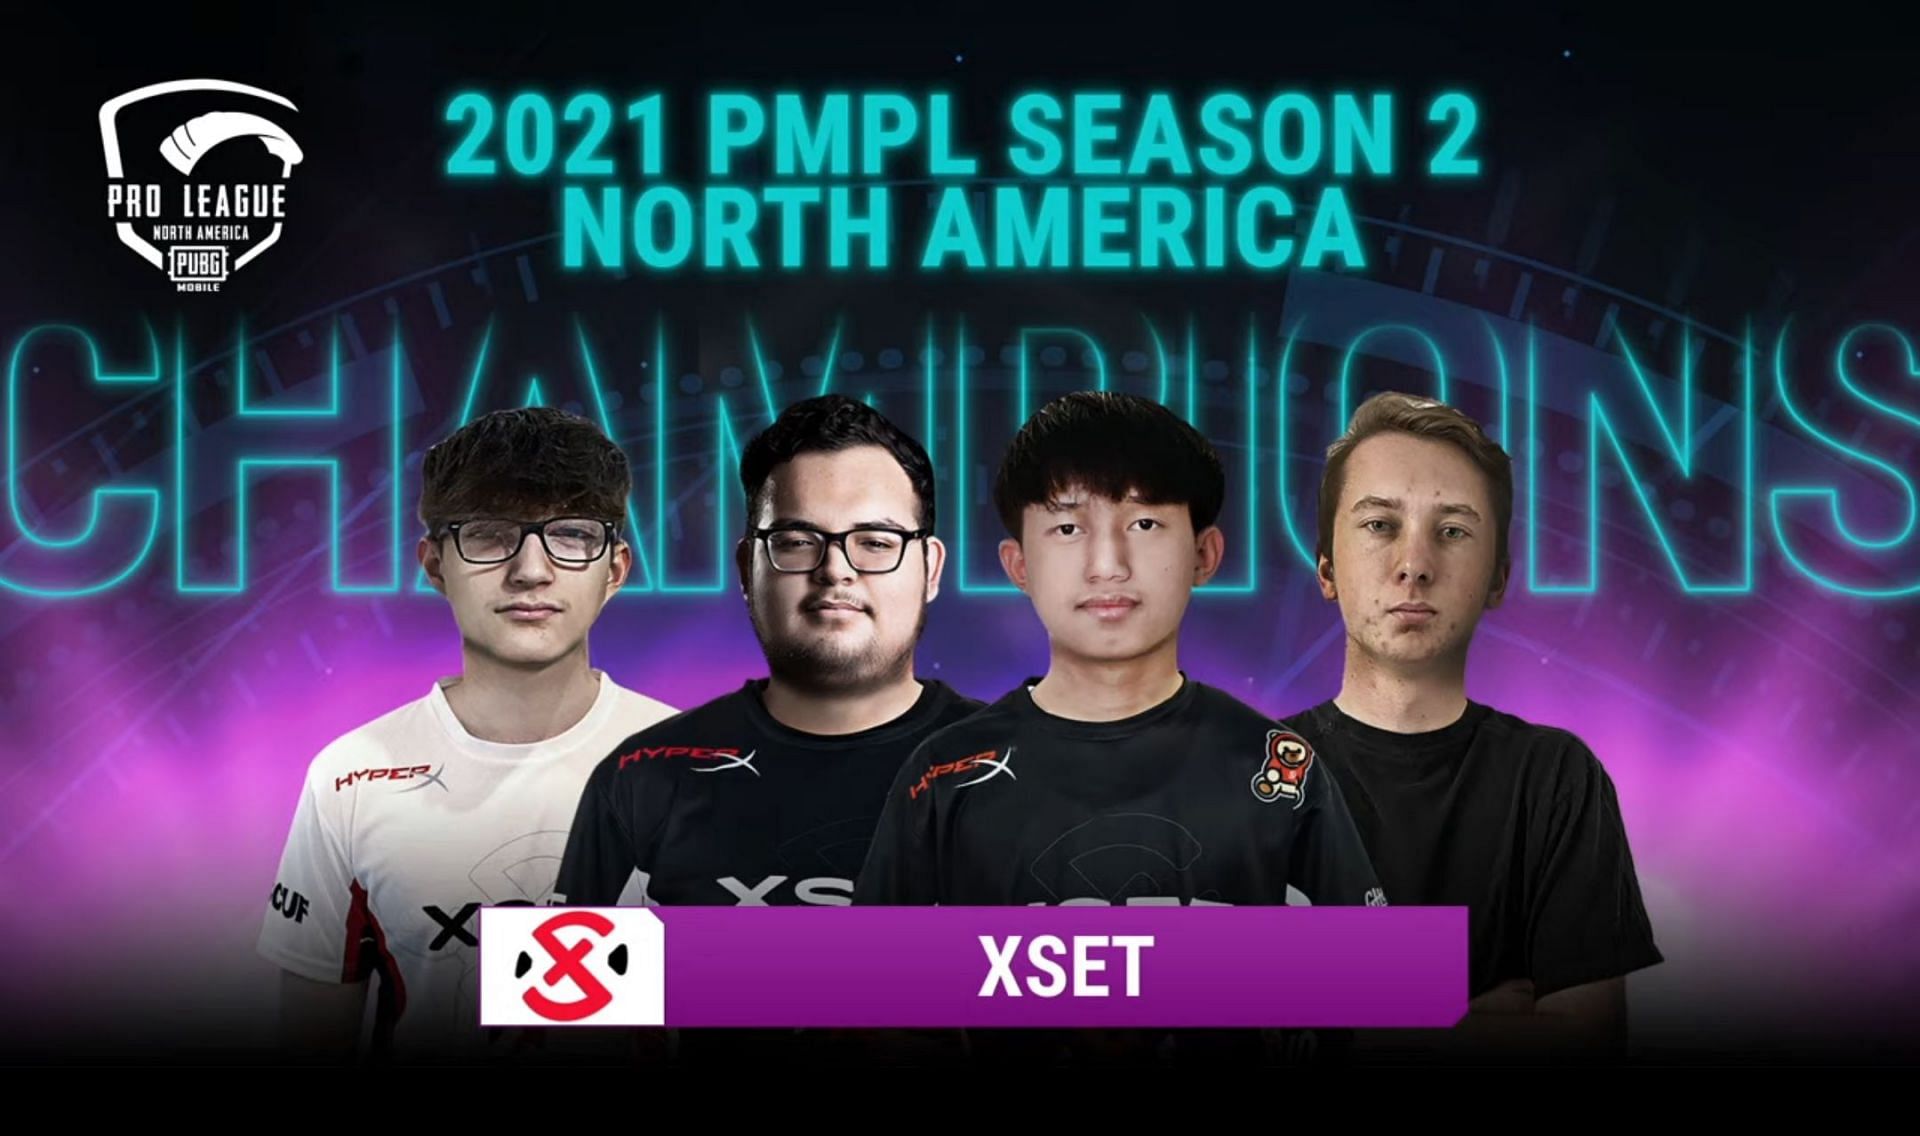 Xset qualified for the Americas Championship Season 2 with this win